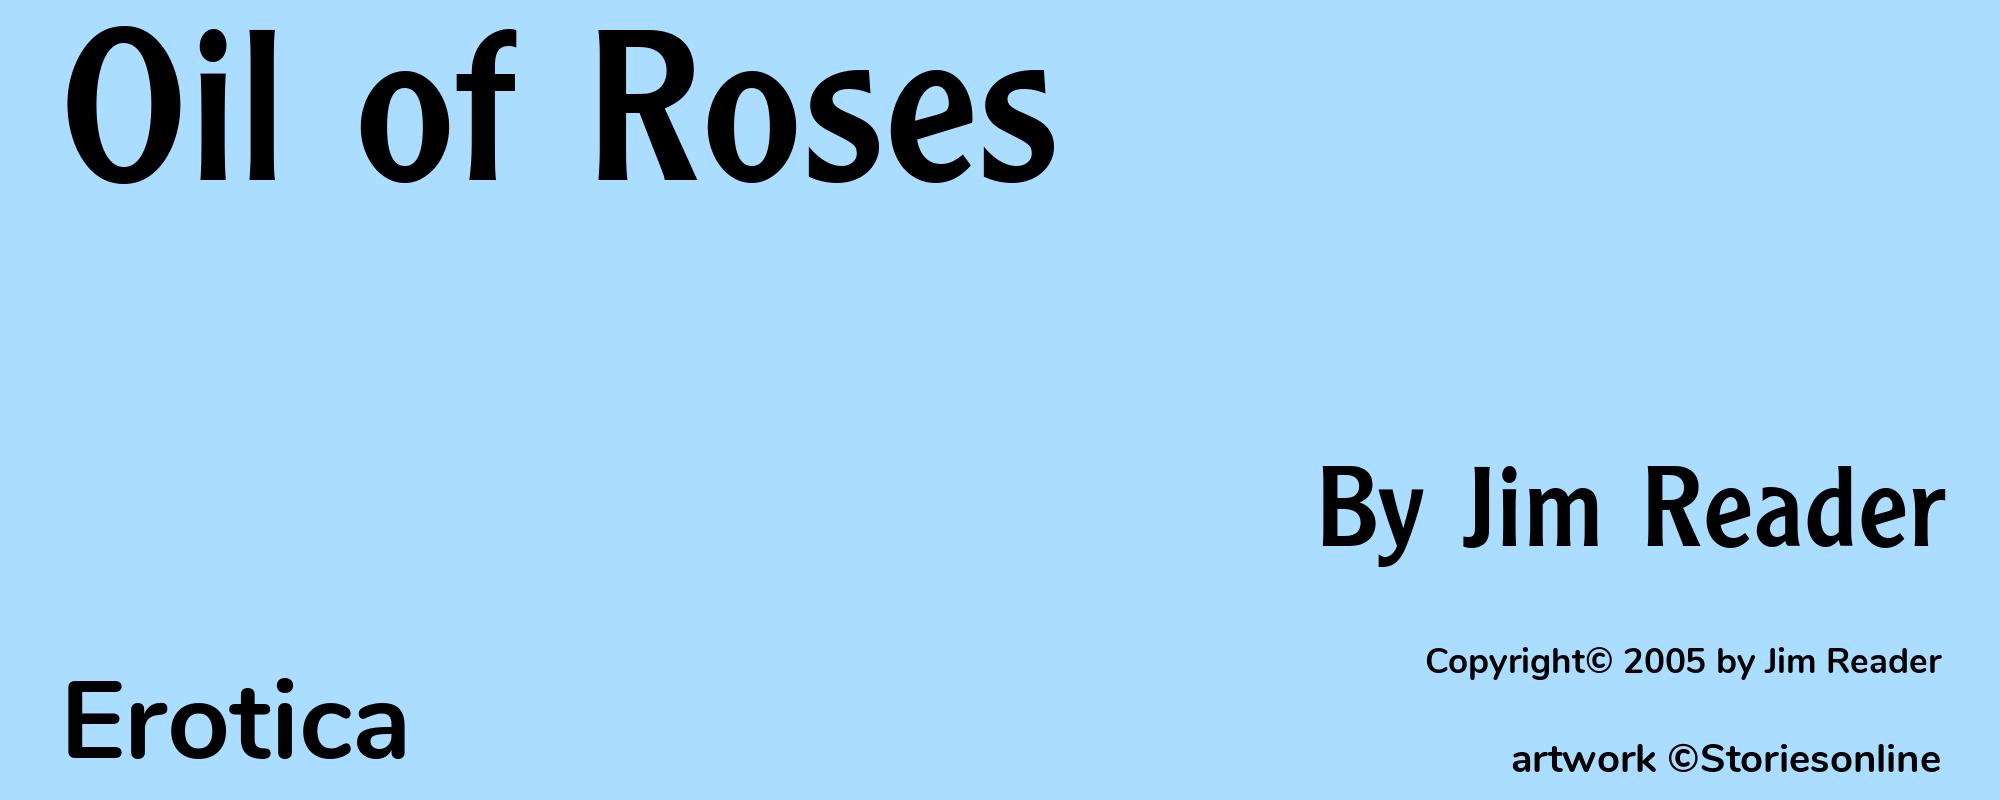 Oil of Roses - Cover